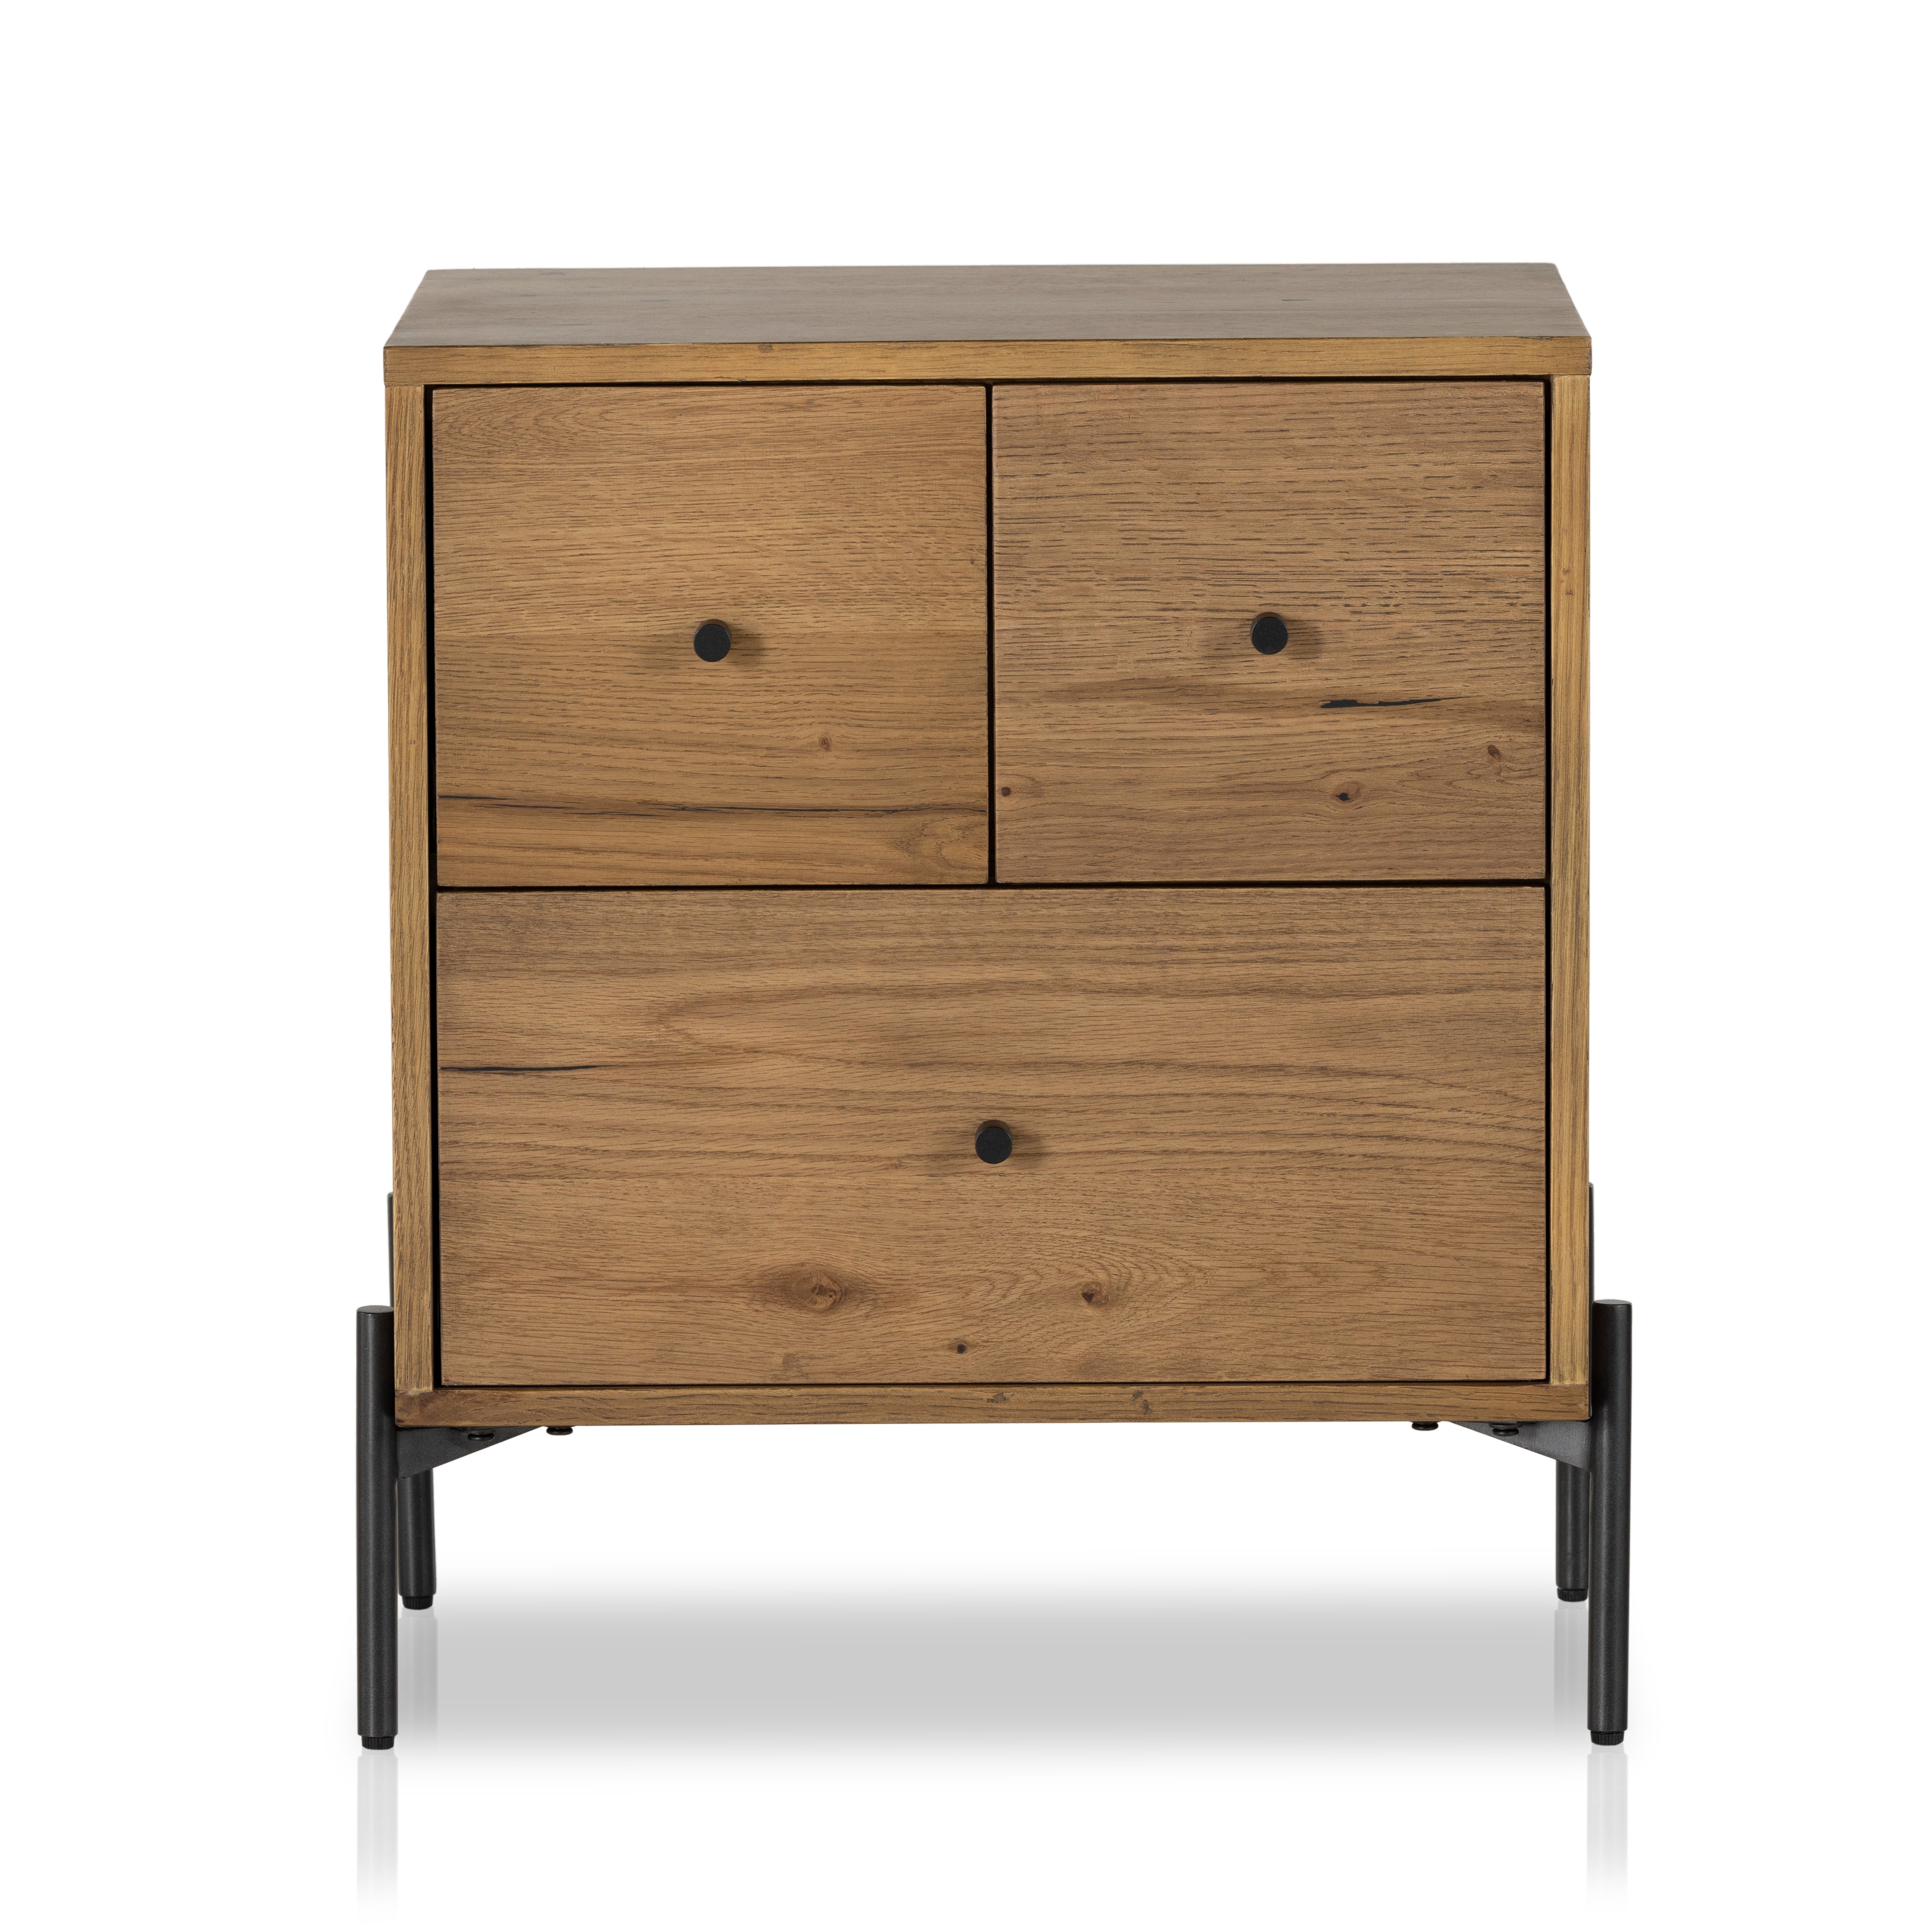 The Eaton Amber Oak Resin Nightstand boasts a classic, timeless style with its intricate details and warm oak finish. Crafted from durable resin, it's the perfect accent piece for your home. Amethyst Home provides interior design, new construction, custom furniture, and area rugs in the Tampa metro area.